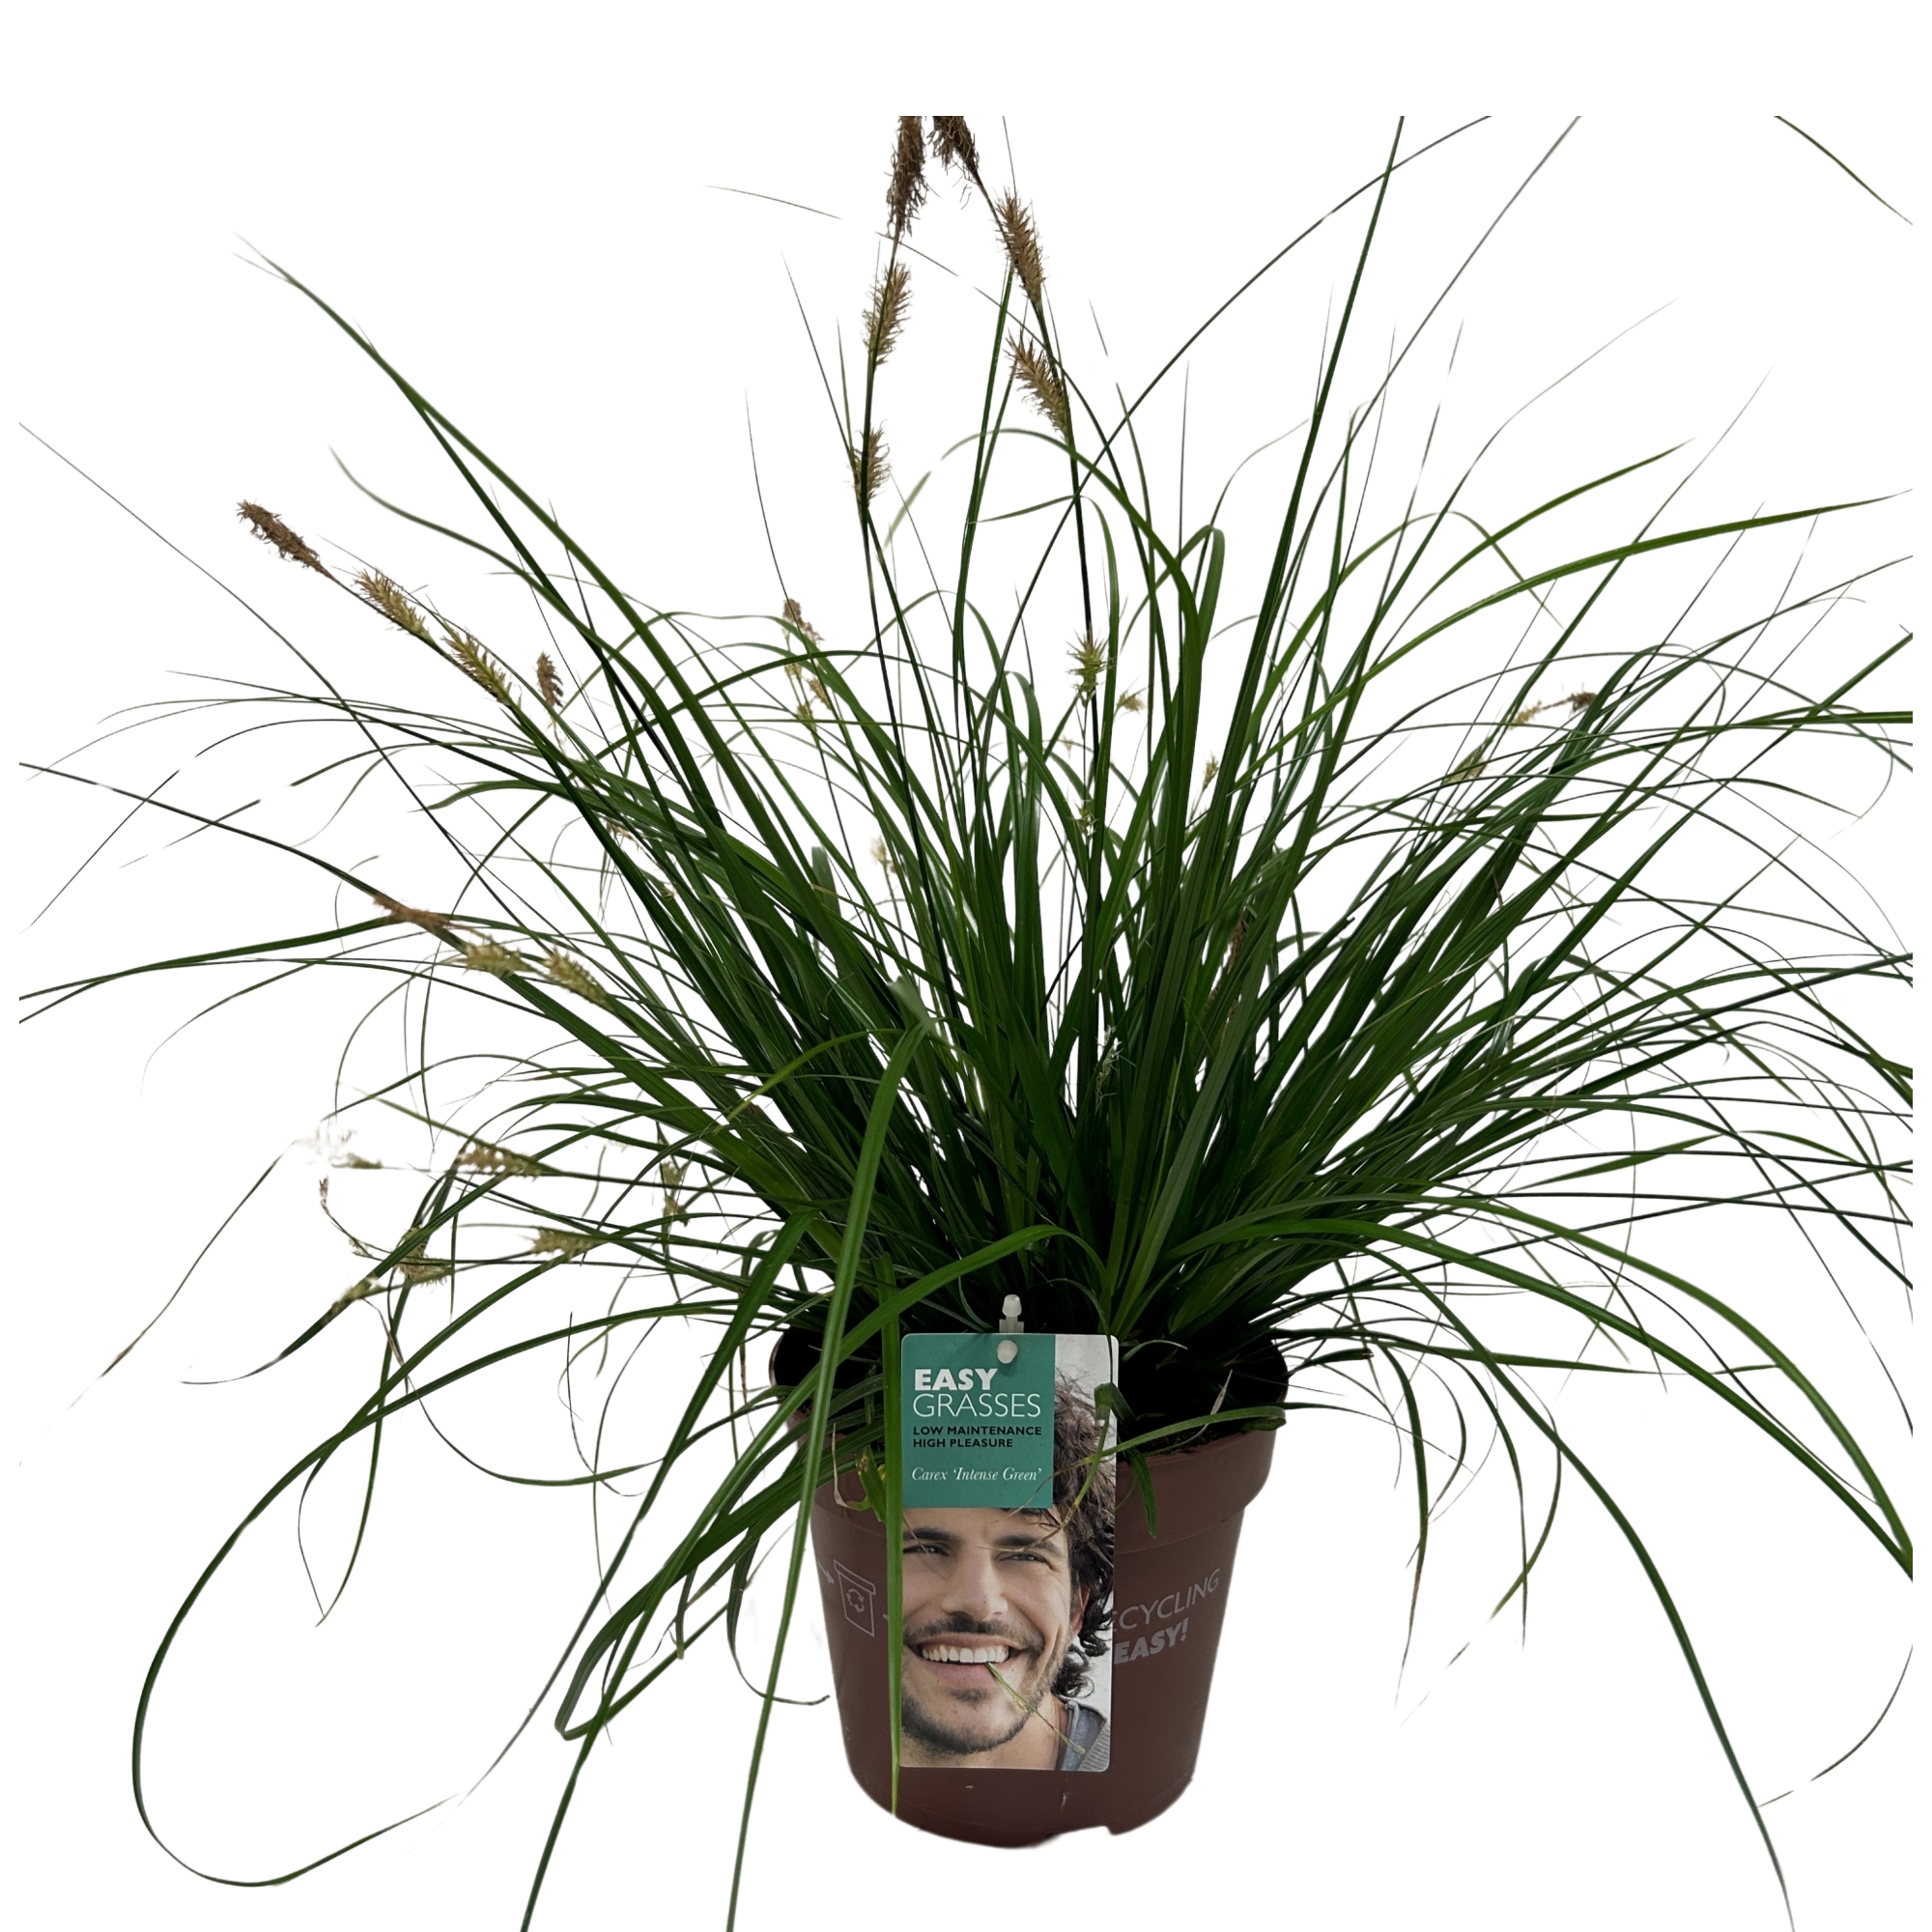 Picture of Carex oshimensis Intense Green